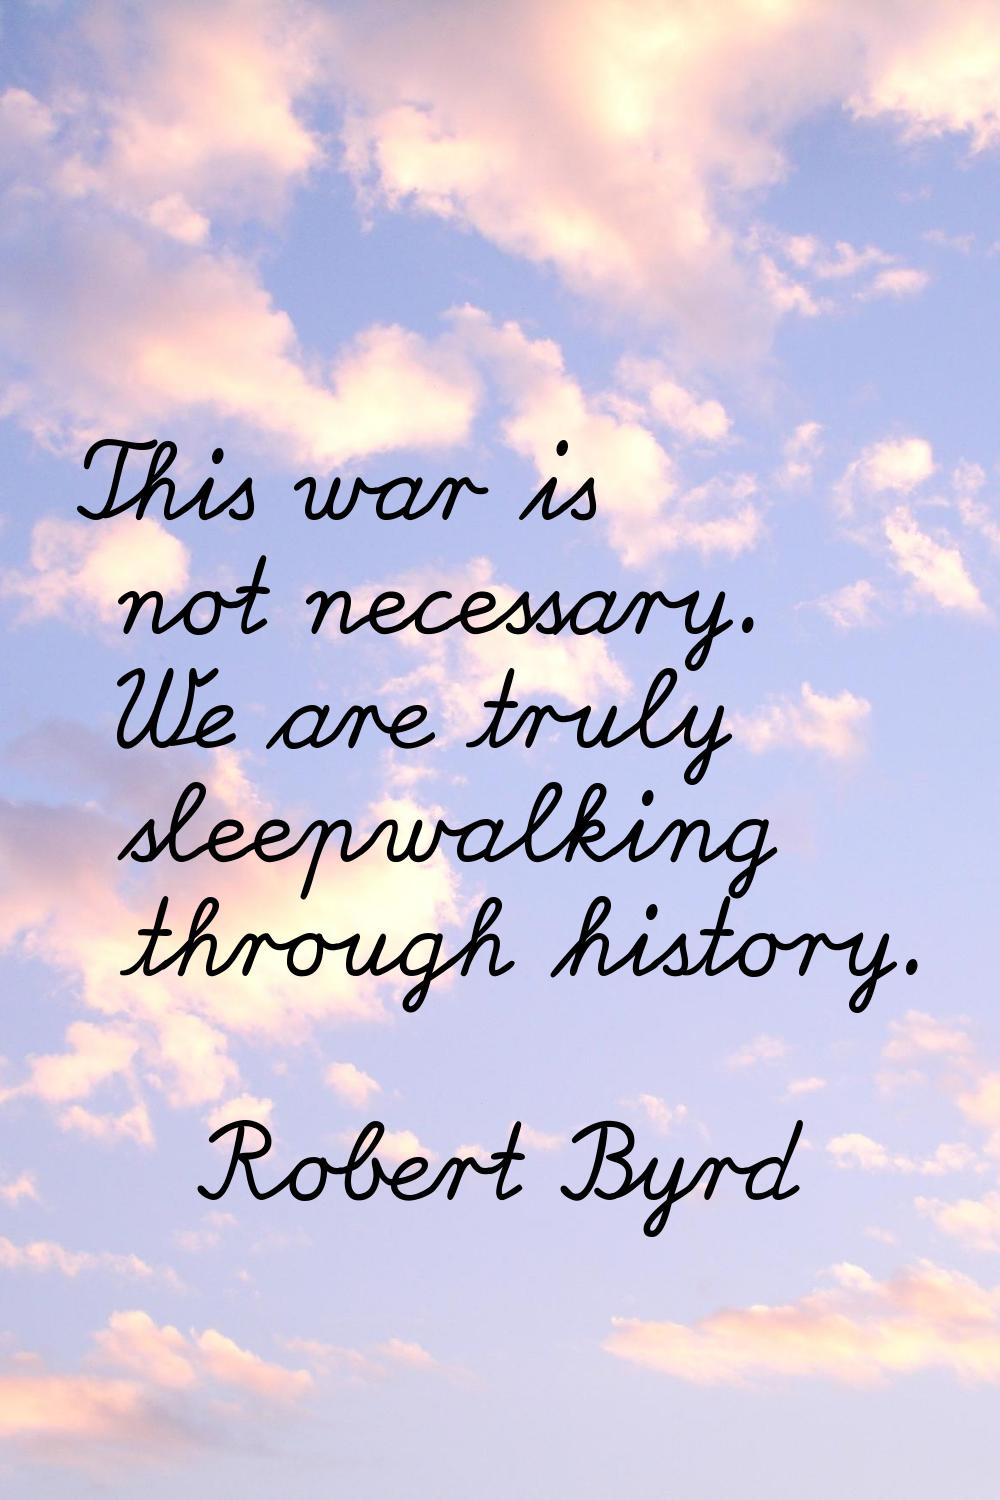 This war is not necessary. We are truly sleepwalking through history.